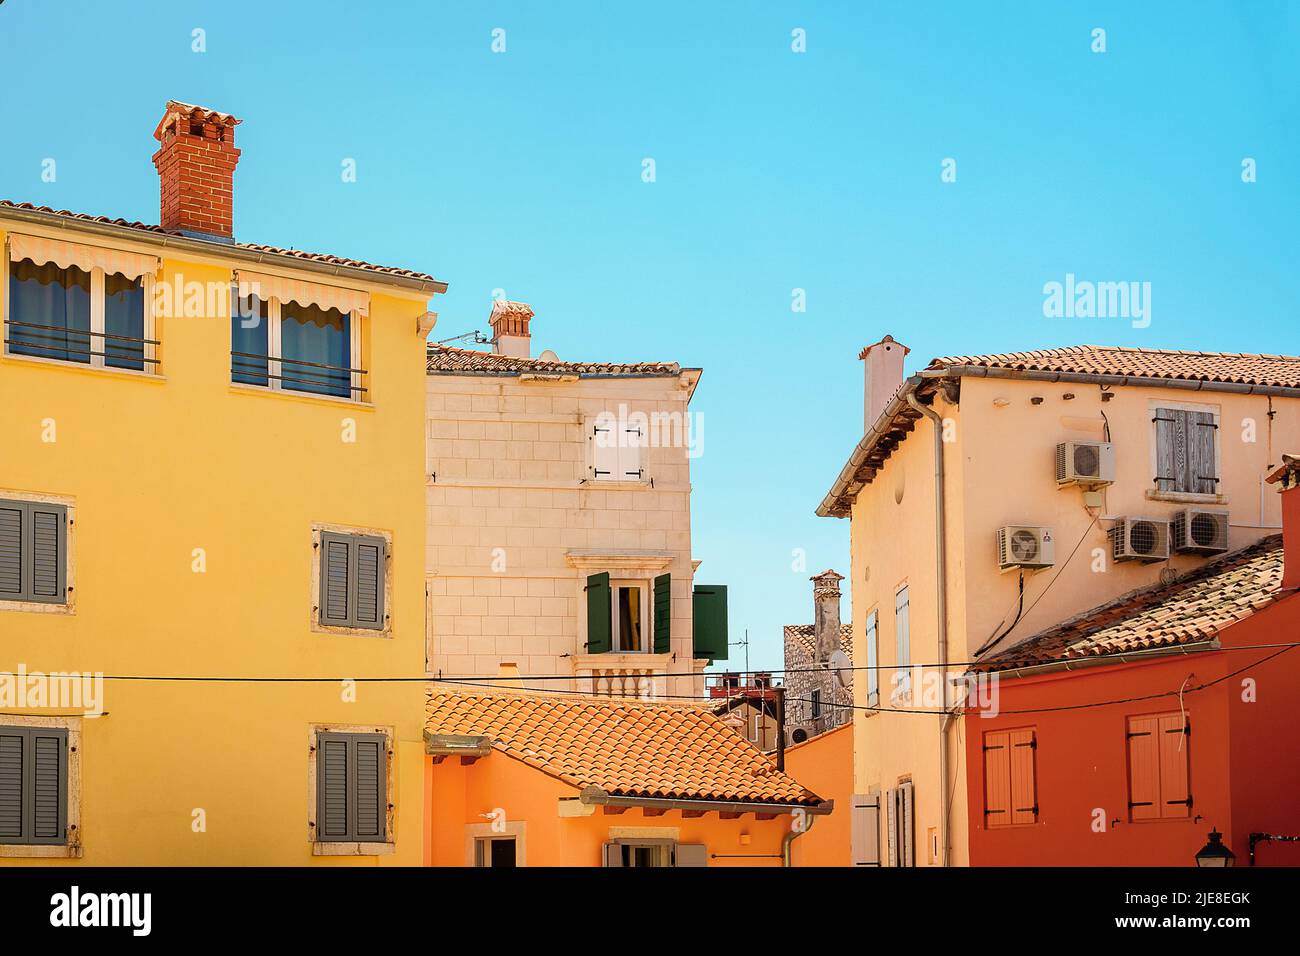 Colorful facades in center of old town of Rovinj, Croatia, Europe. Stock Photo